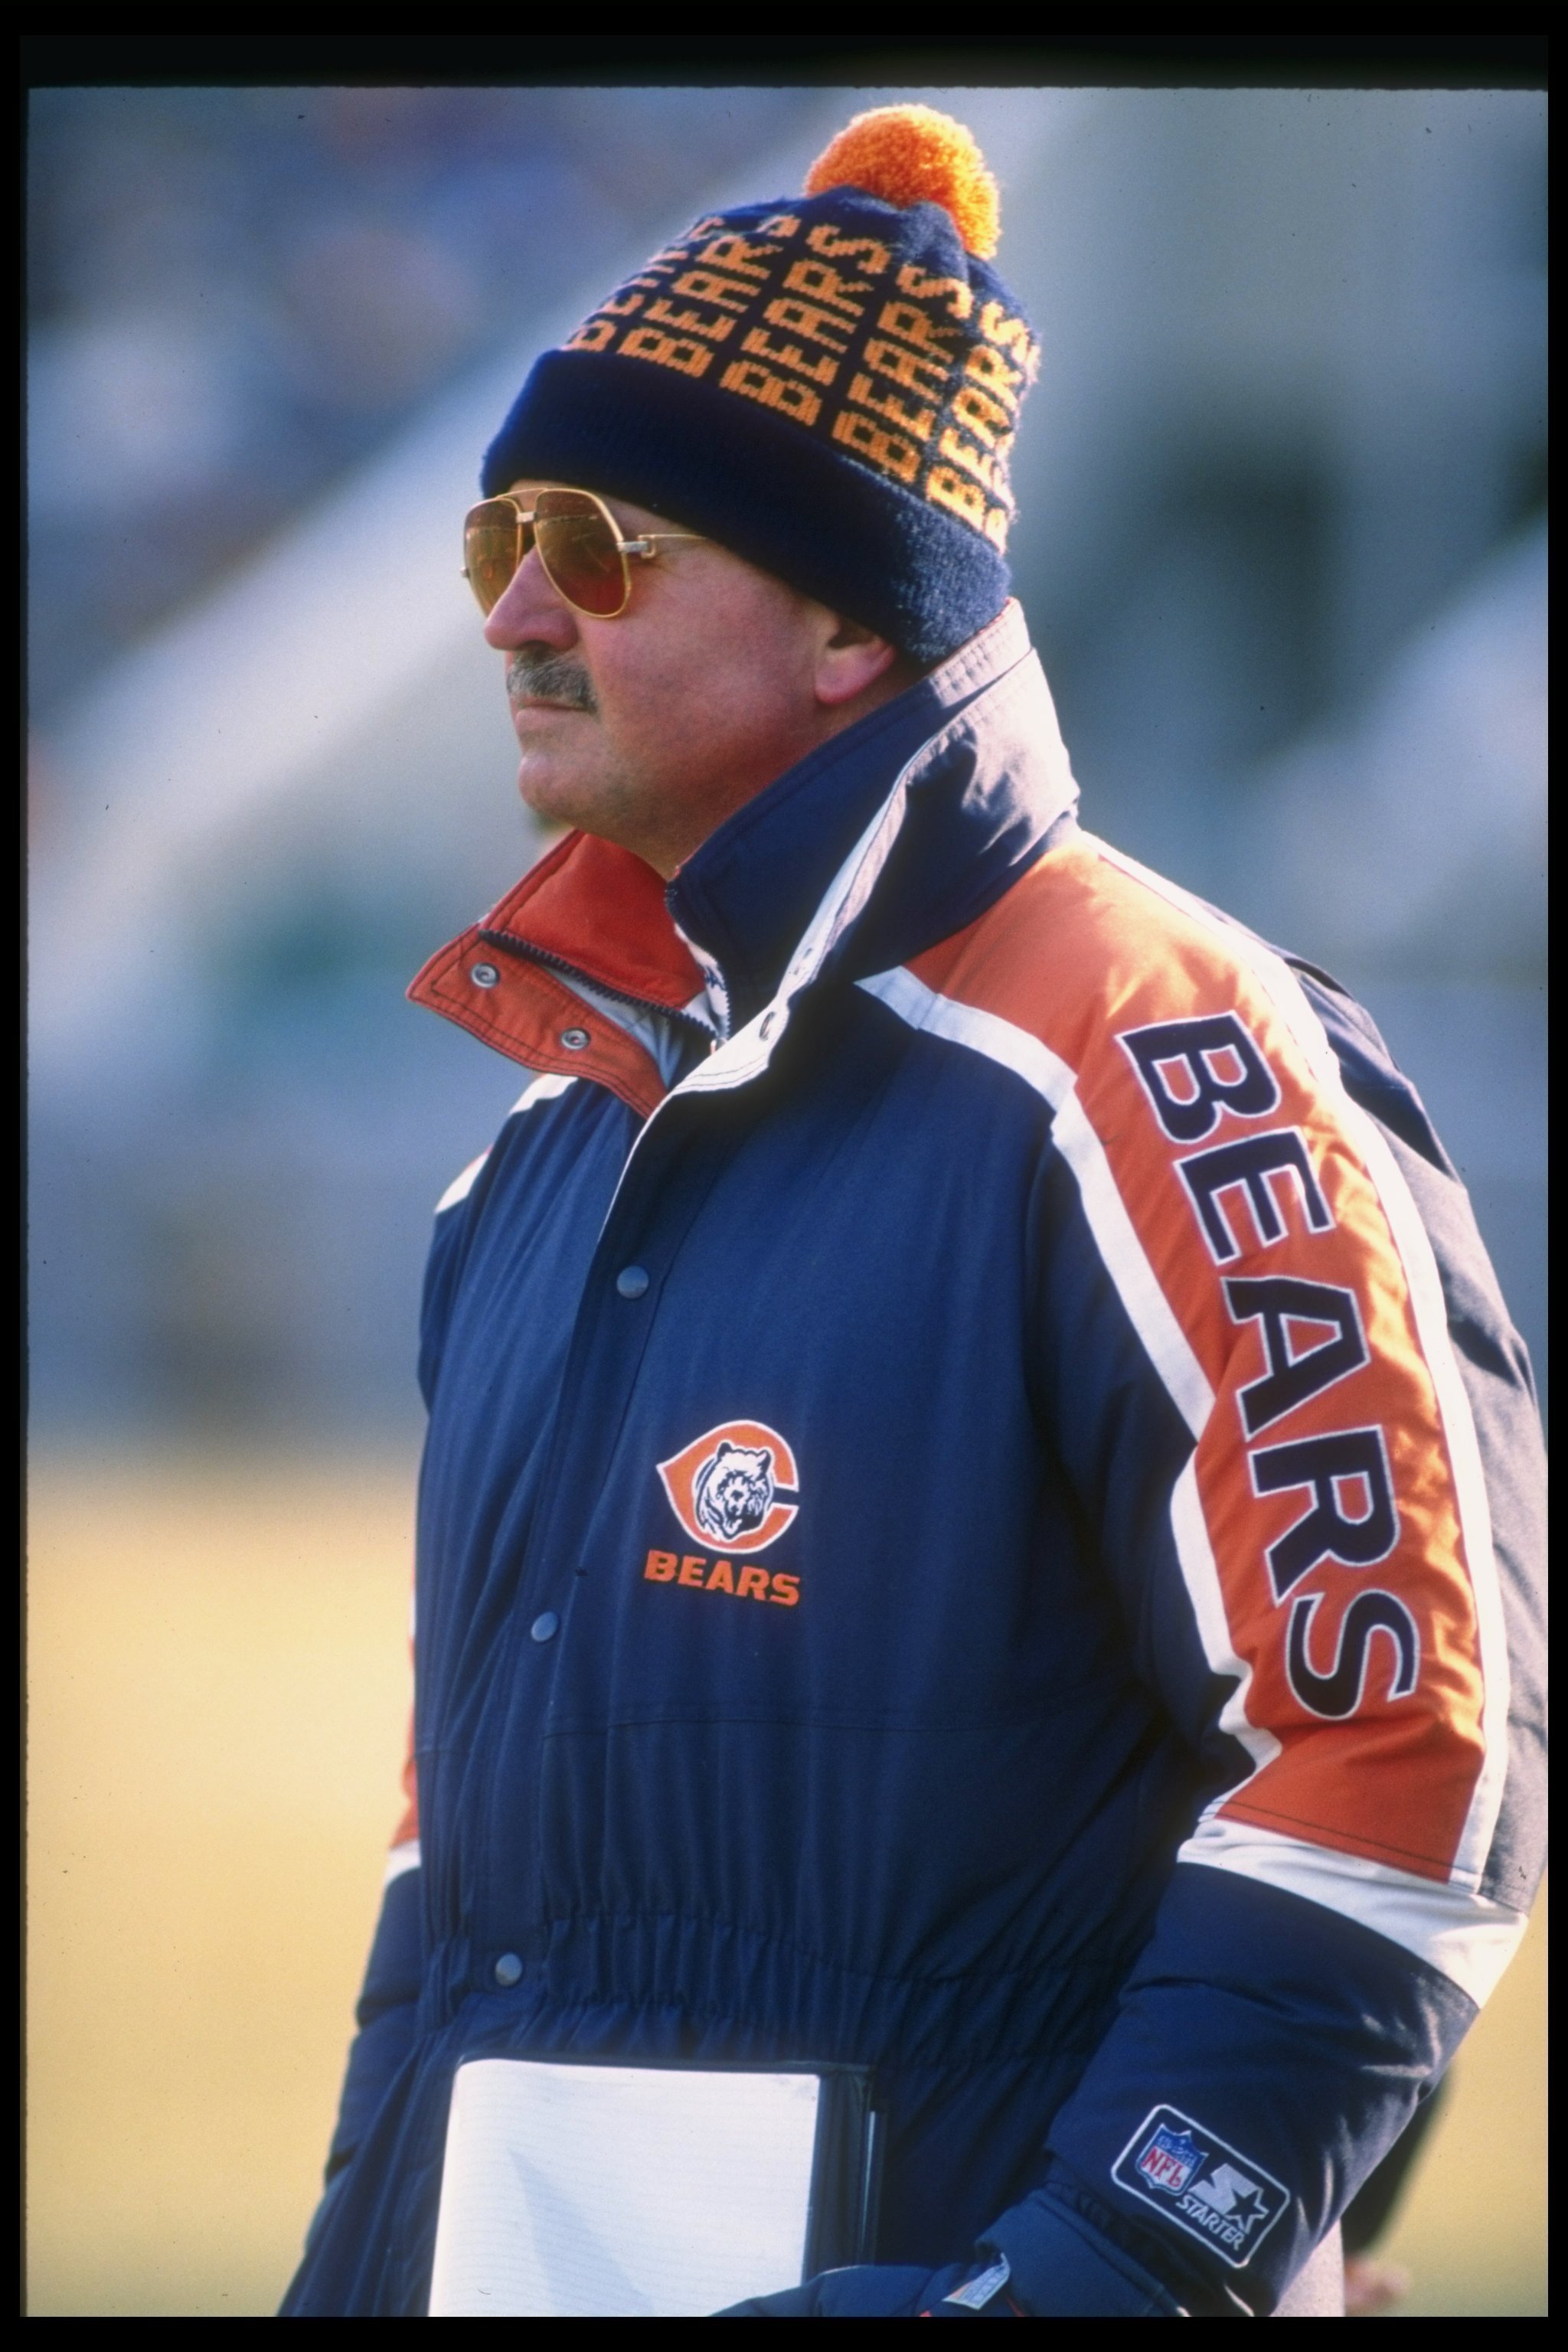 15 Best Dressed Head Coaches in NFL History